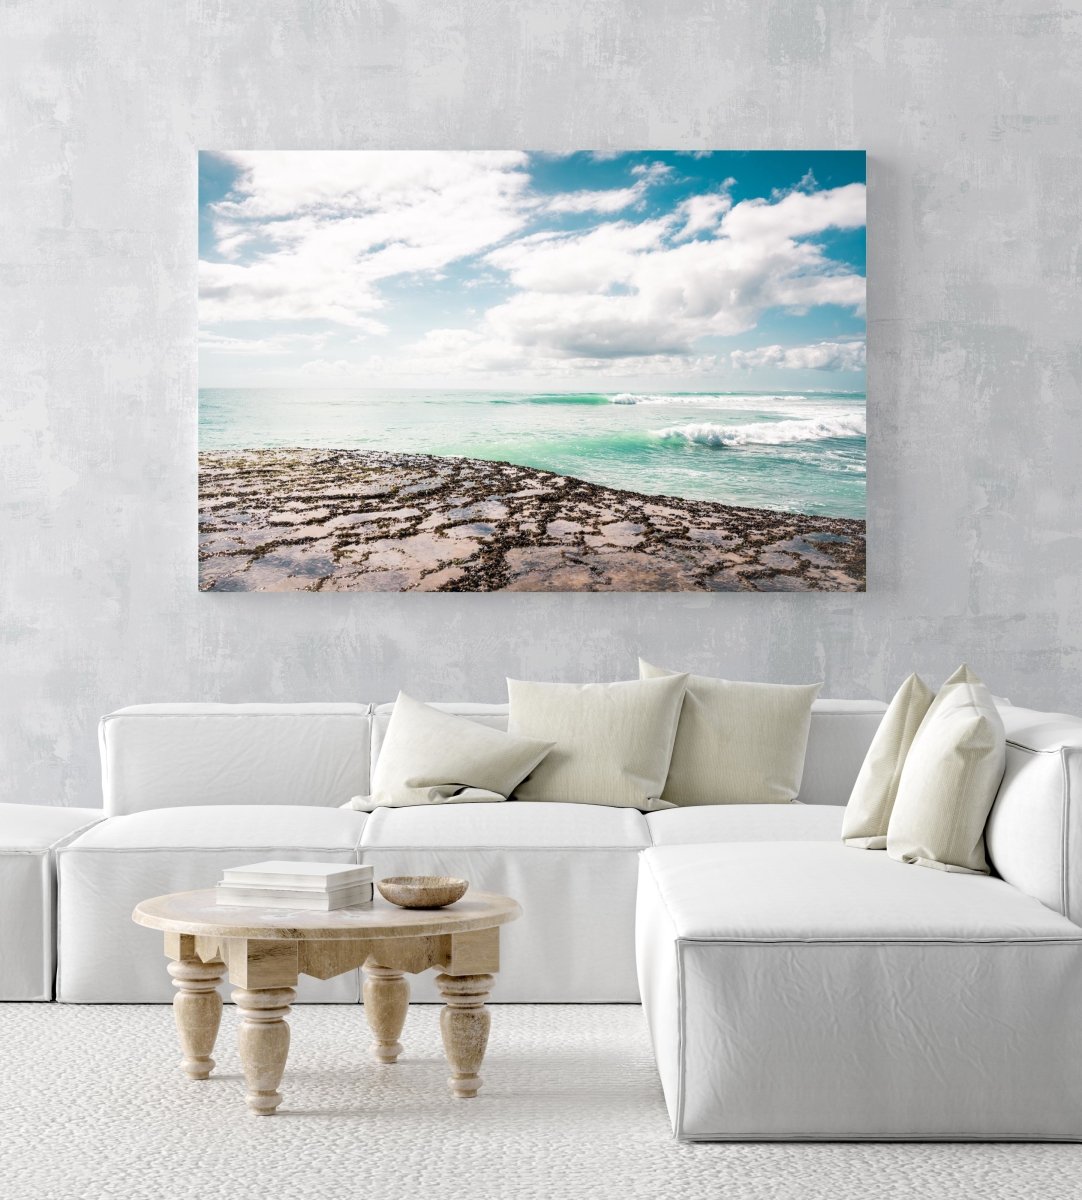 Turquoise waves breaking along arniston coast south africa in an acrylic/perspex frame